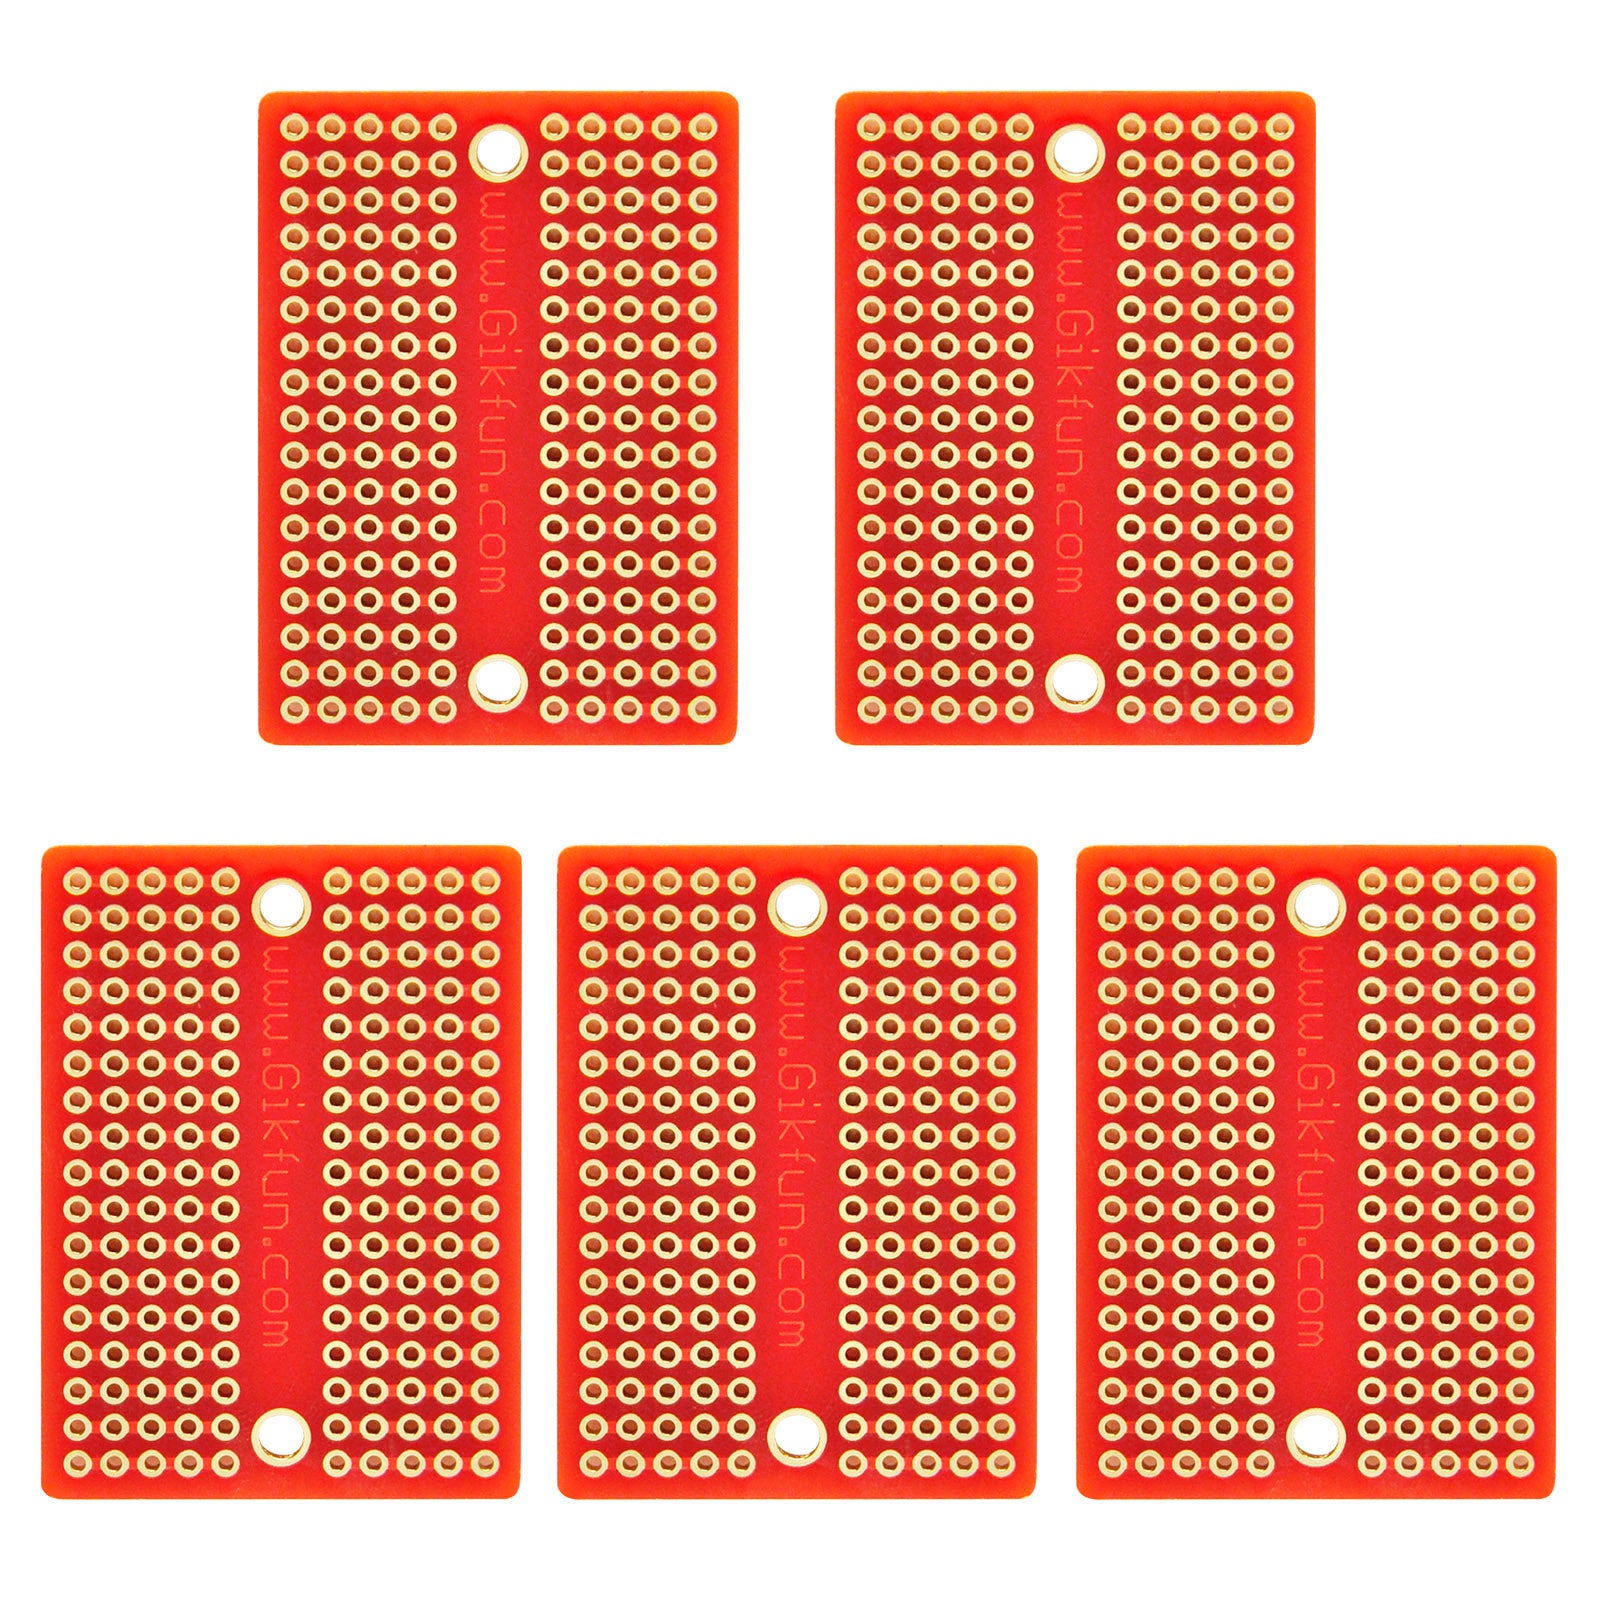 Gikfun Mini Solder-able Breadboard Gold Plated Finish Proto Board PCB for Arduino Electronic DIY (Pack of 5PCS)